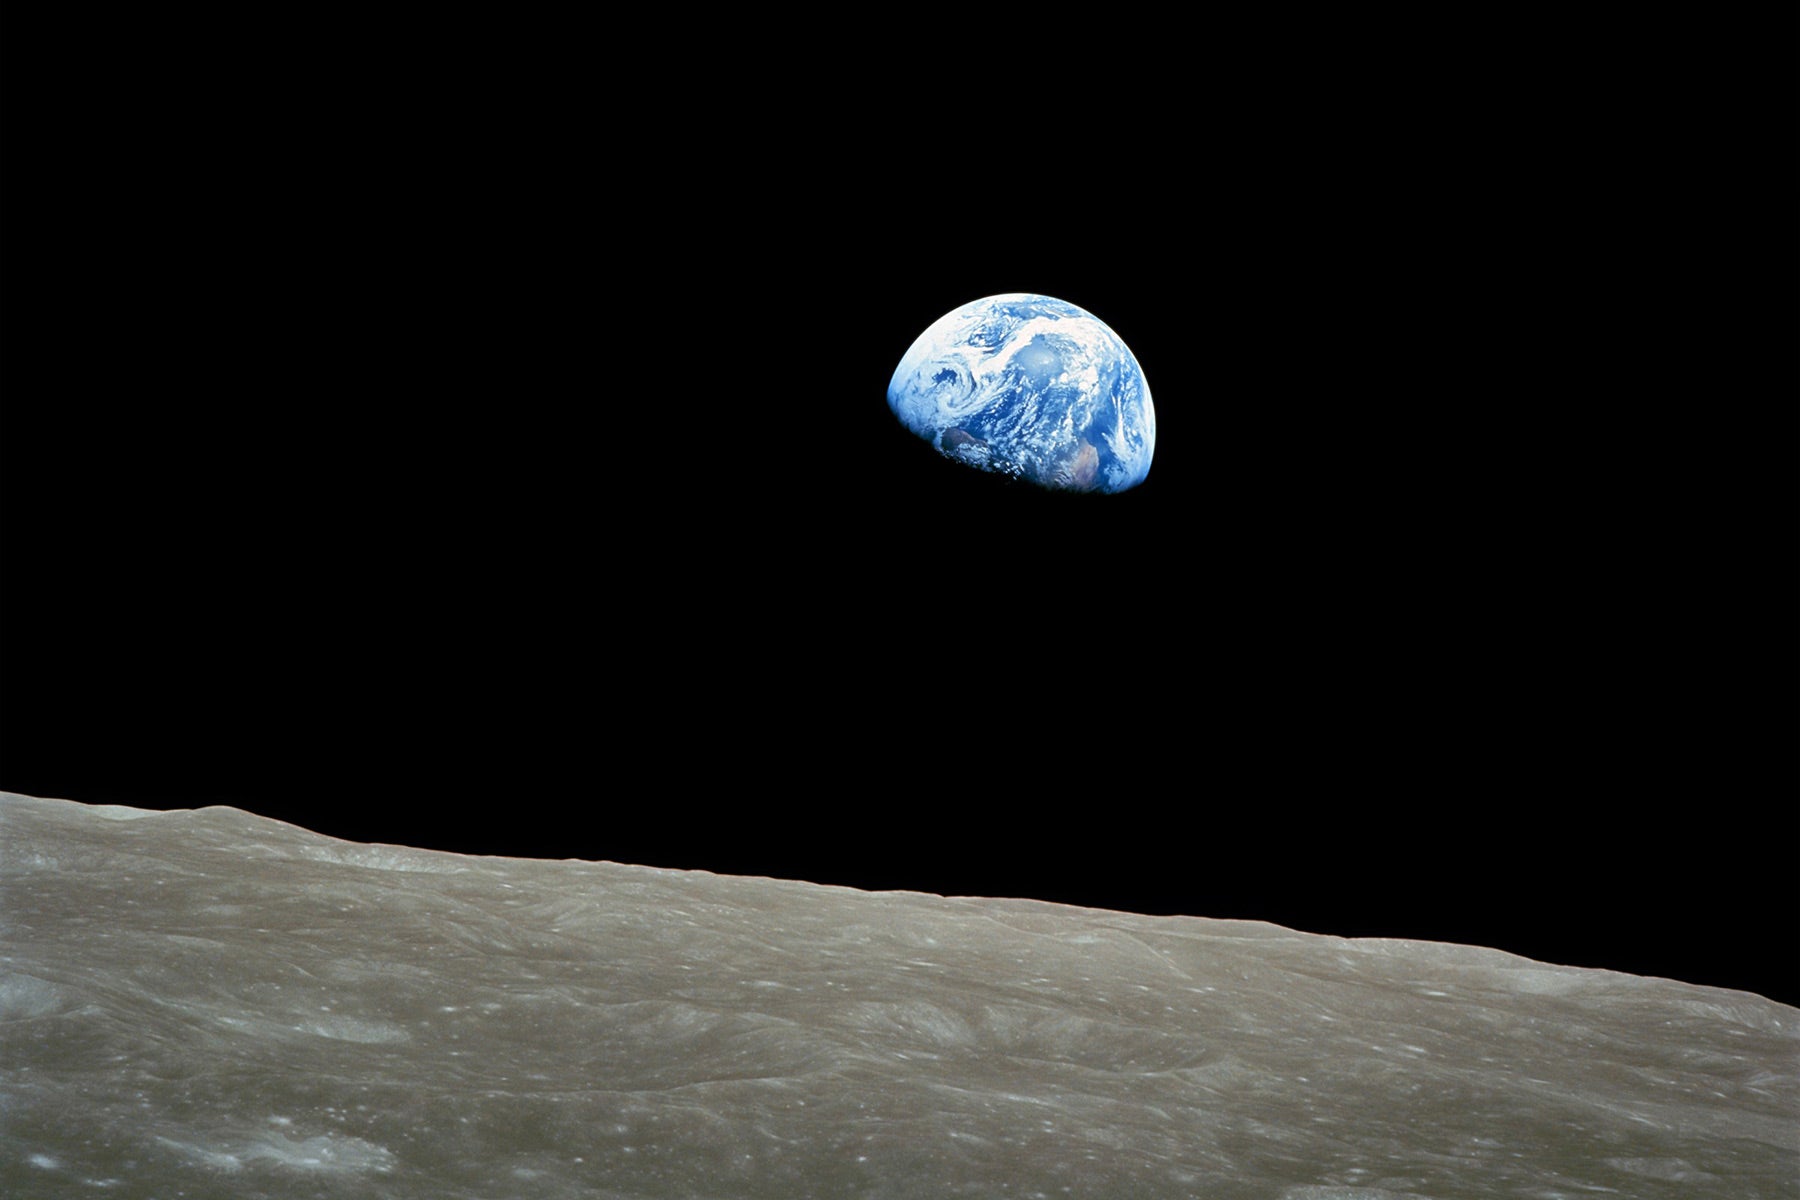 Earthrise by NASA/Bill Anders inspired new perspectives of planet Earth as a closed ecosystem